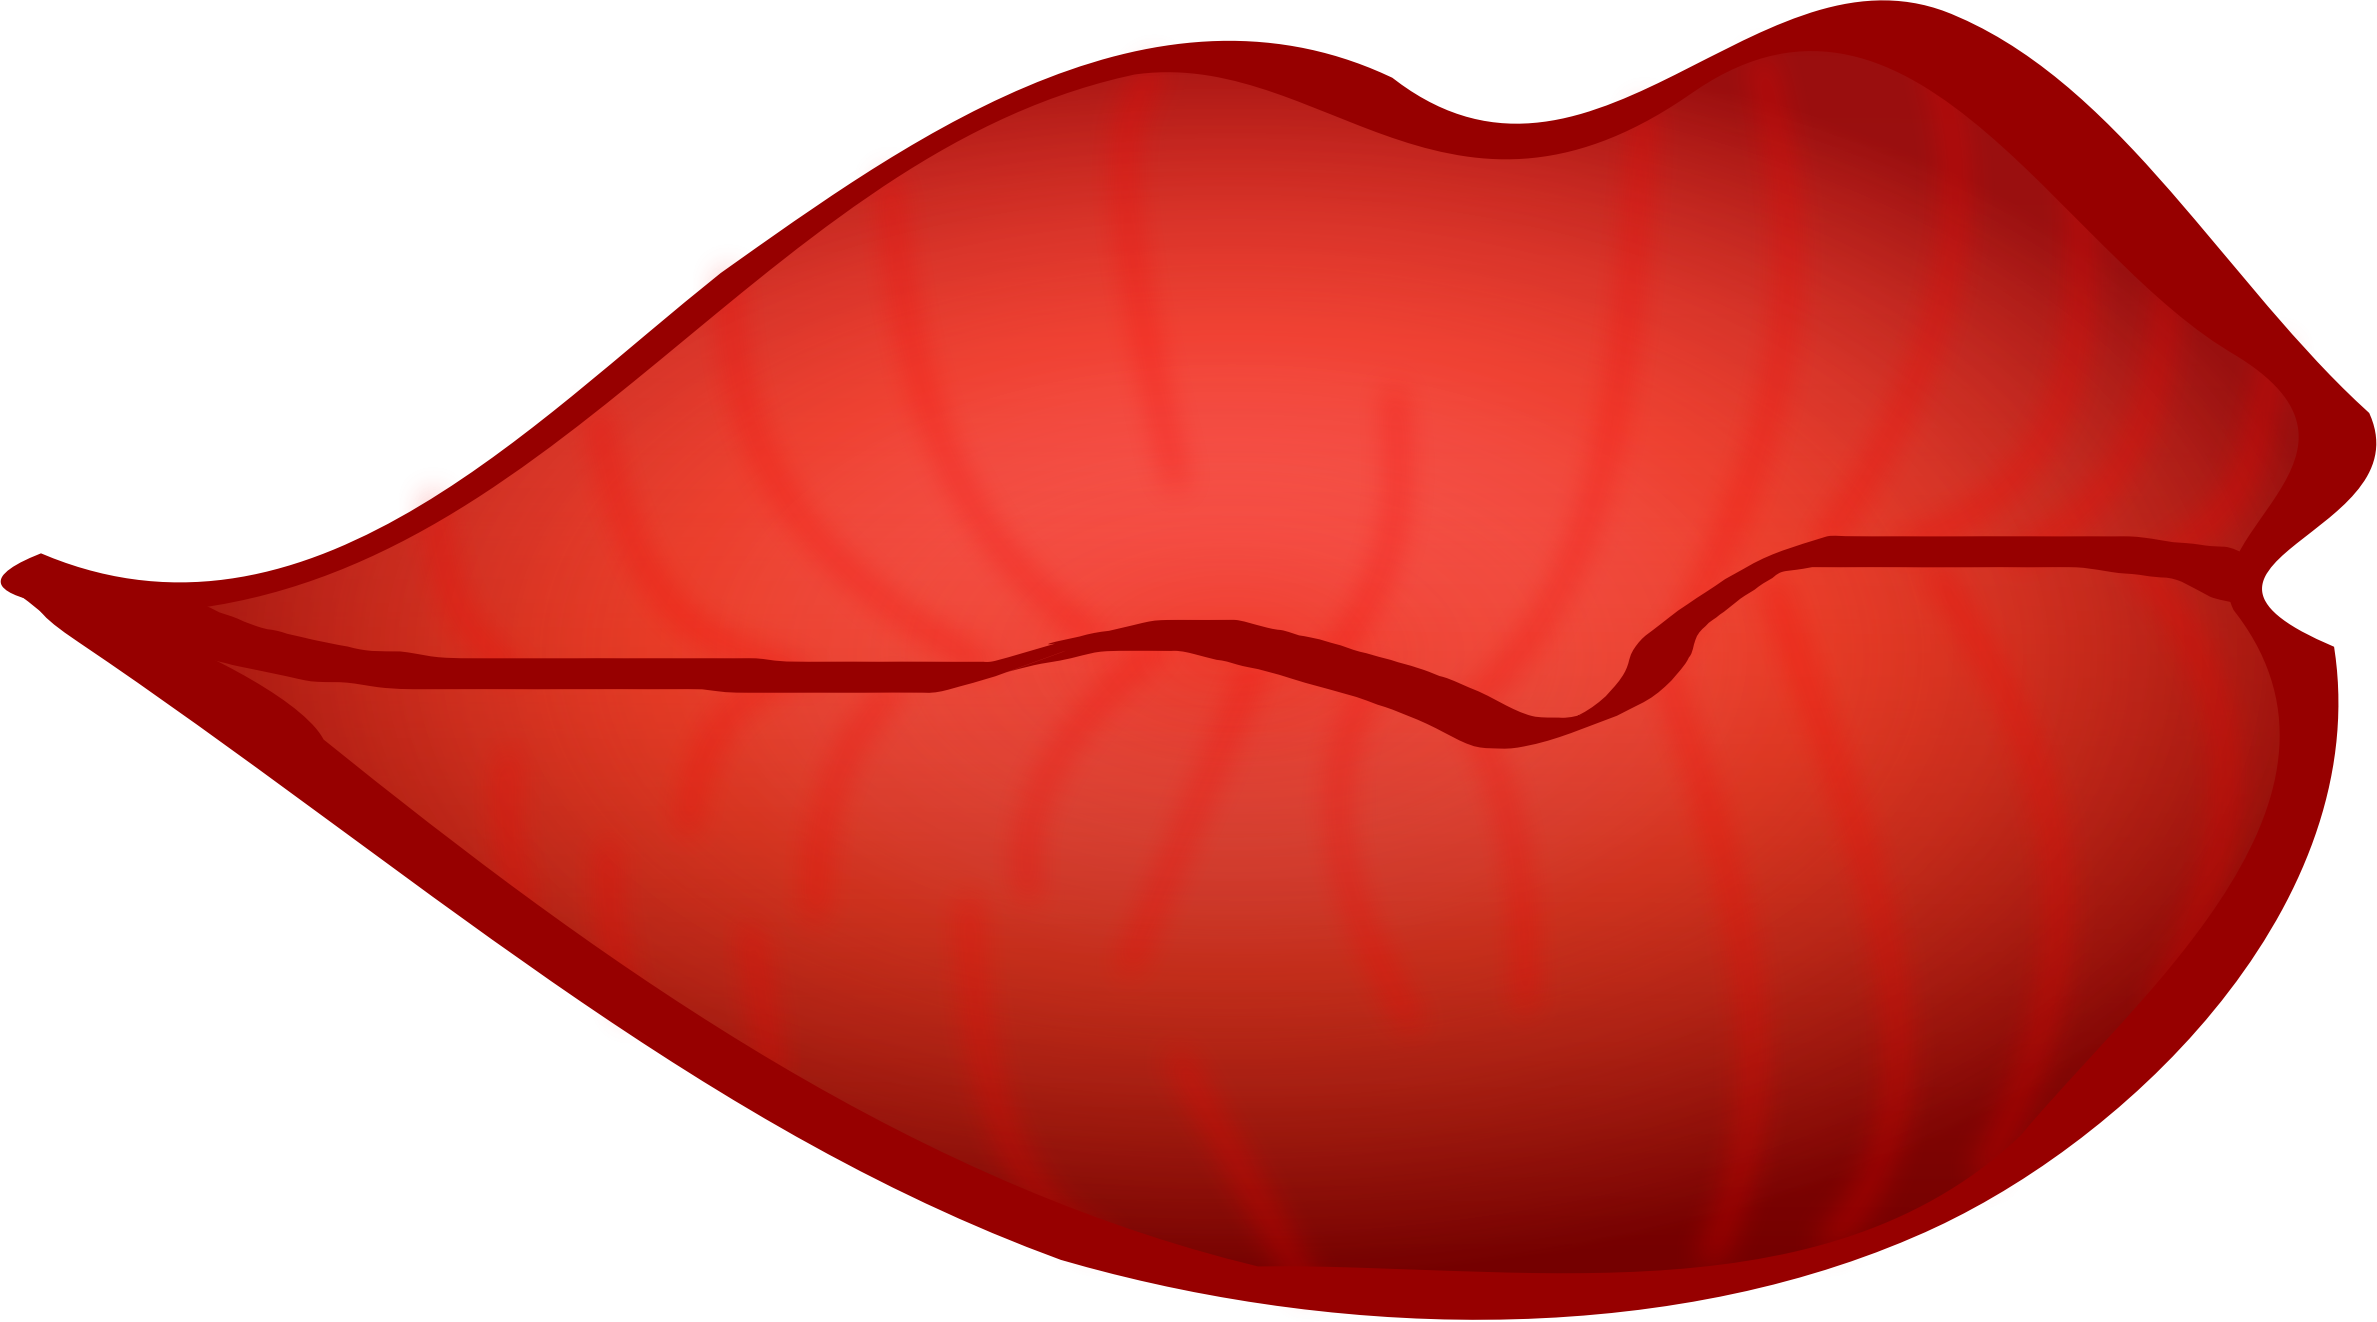 Cartoon Lips Red PNG Images Transparent Background | PNG Play